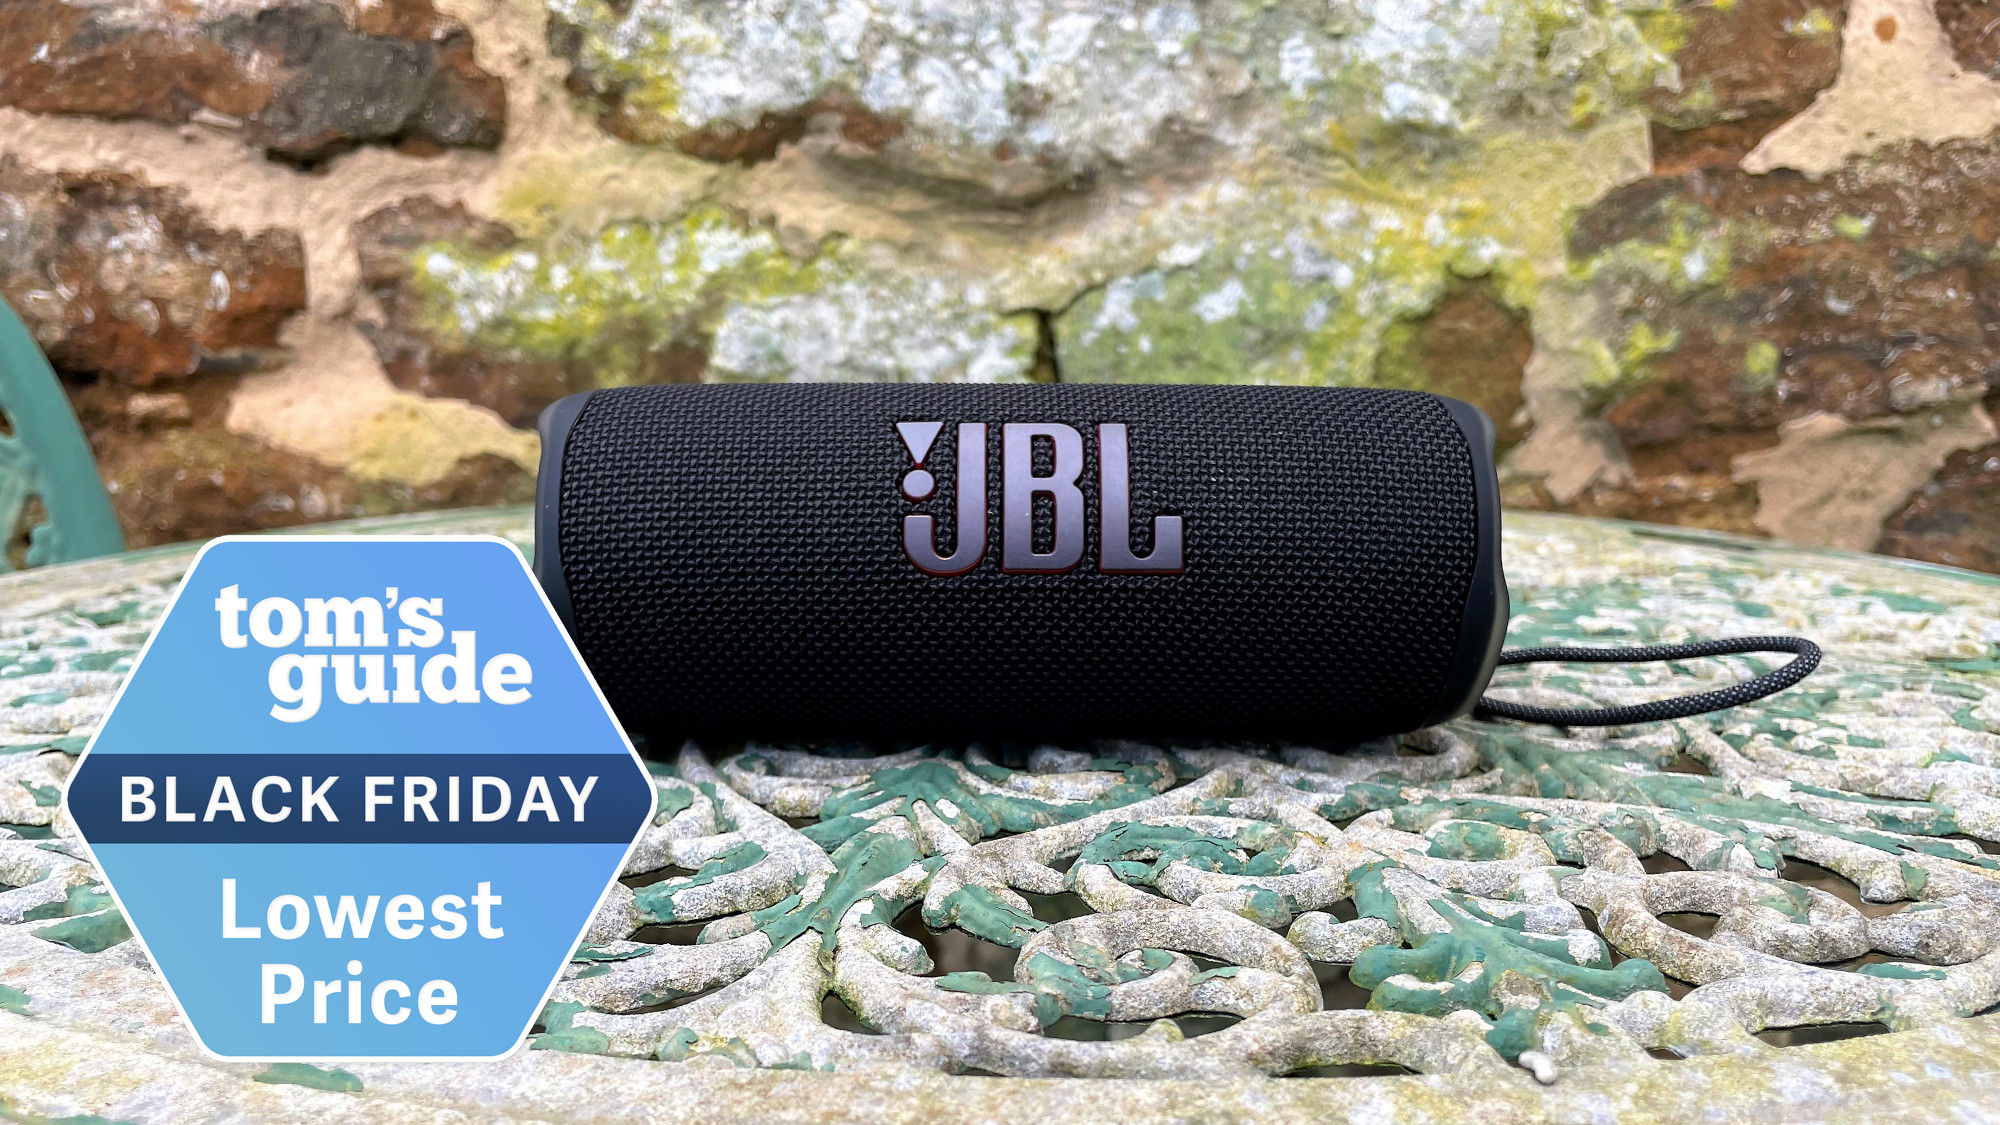 One of my favorite JBL Bluetooth speakers just crashed to $89 for Black  Friday